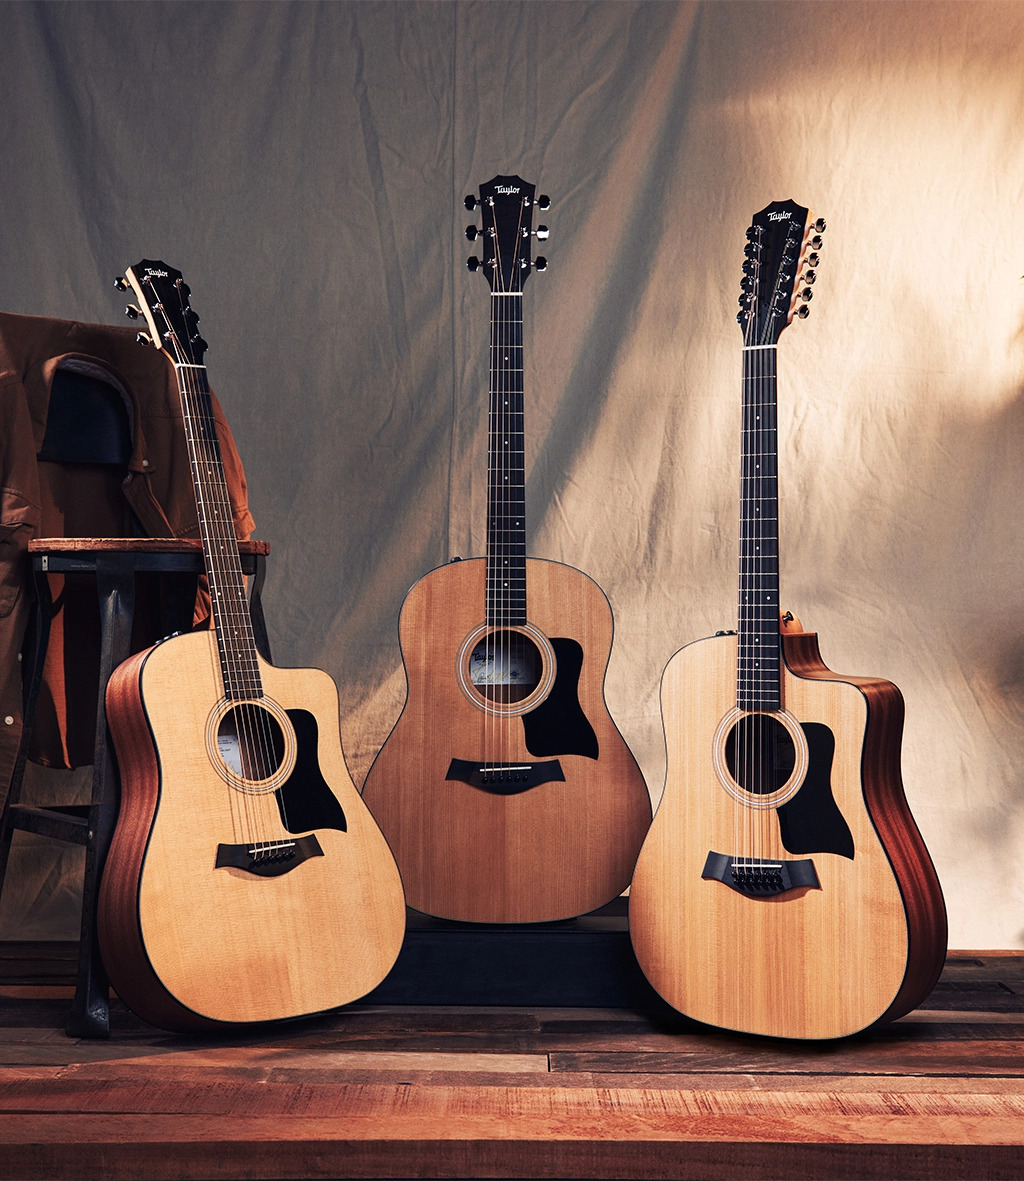 Three guitars on stands in front of a stool and backdrop